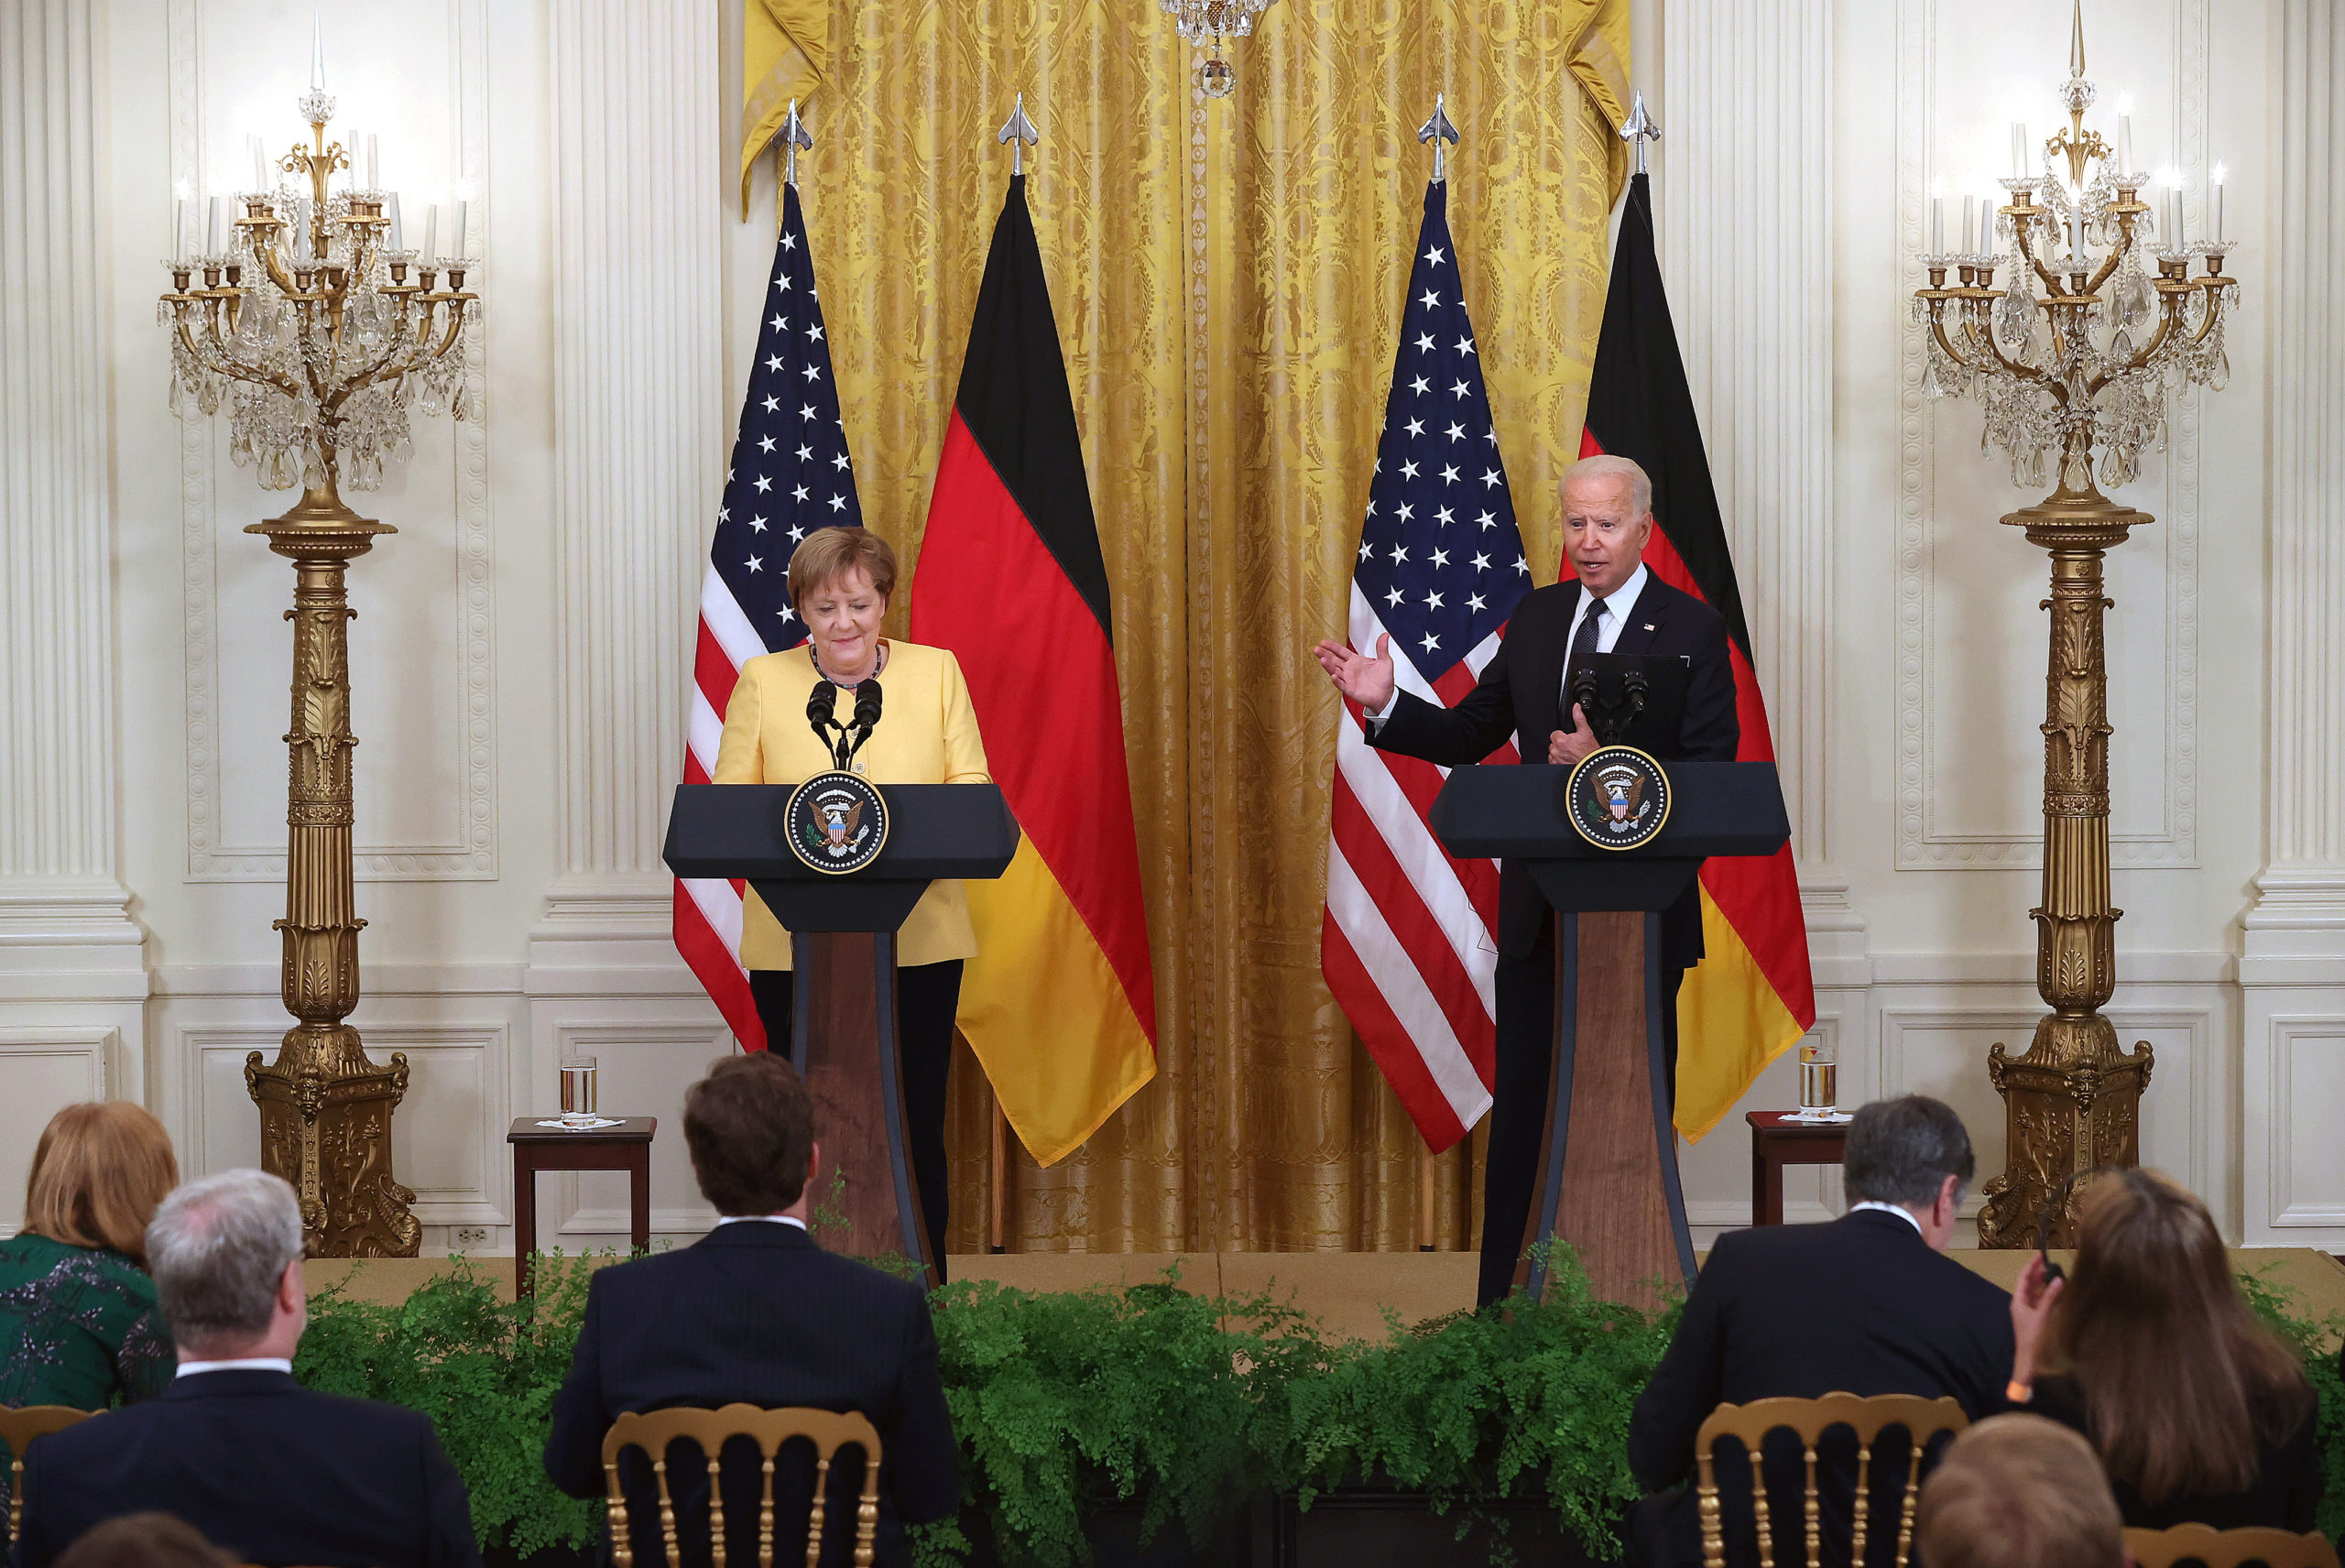 German Chancellor Angela Merkel and President Joe Biden hold a joint news conference on July 15. (Chip Somodevilla/Getty Images)